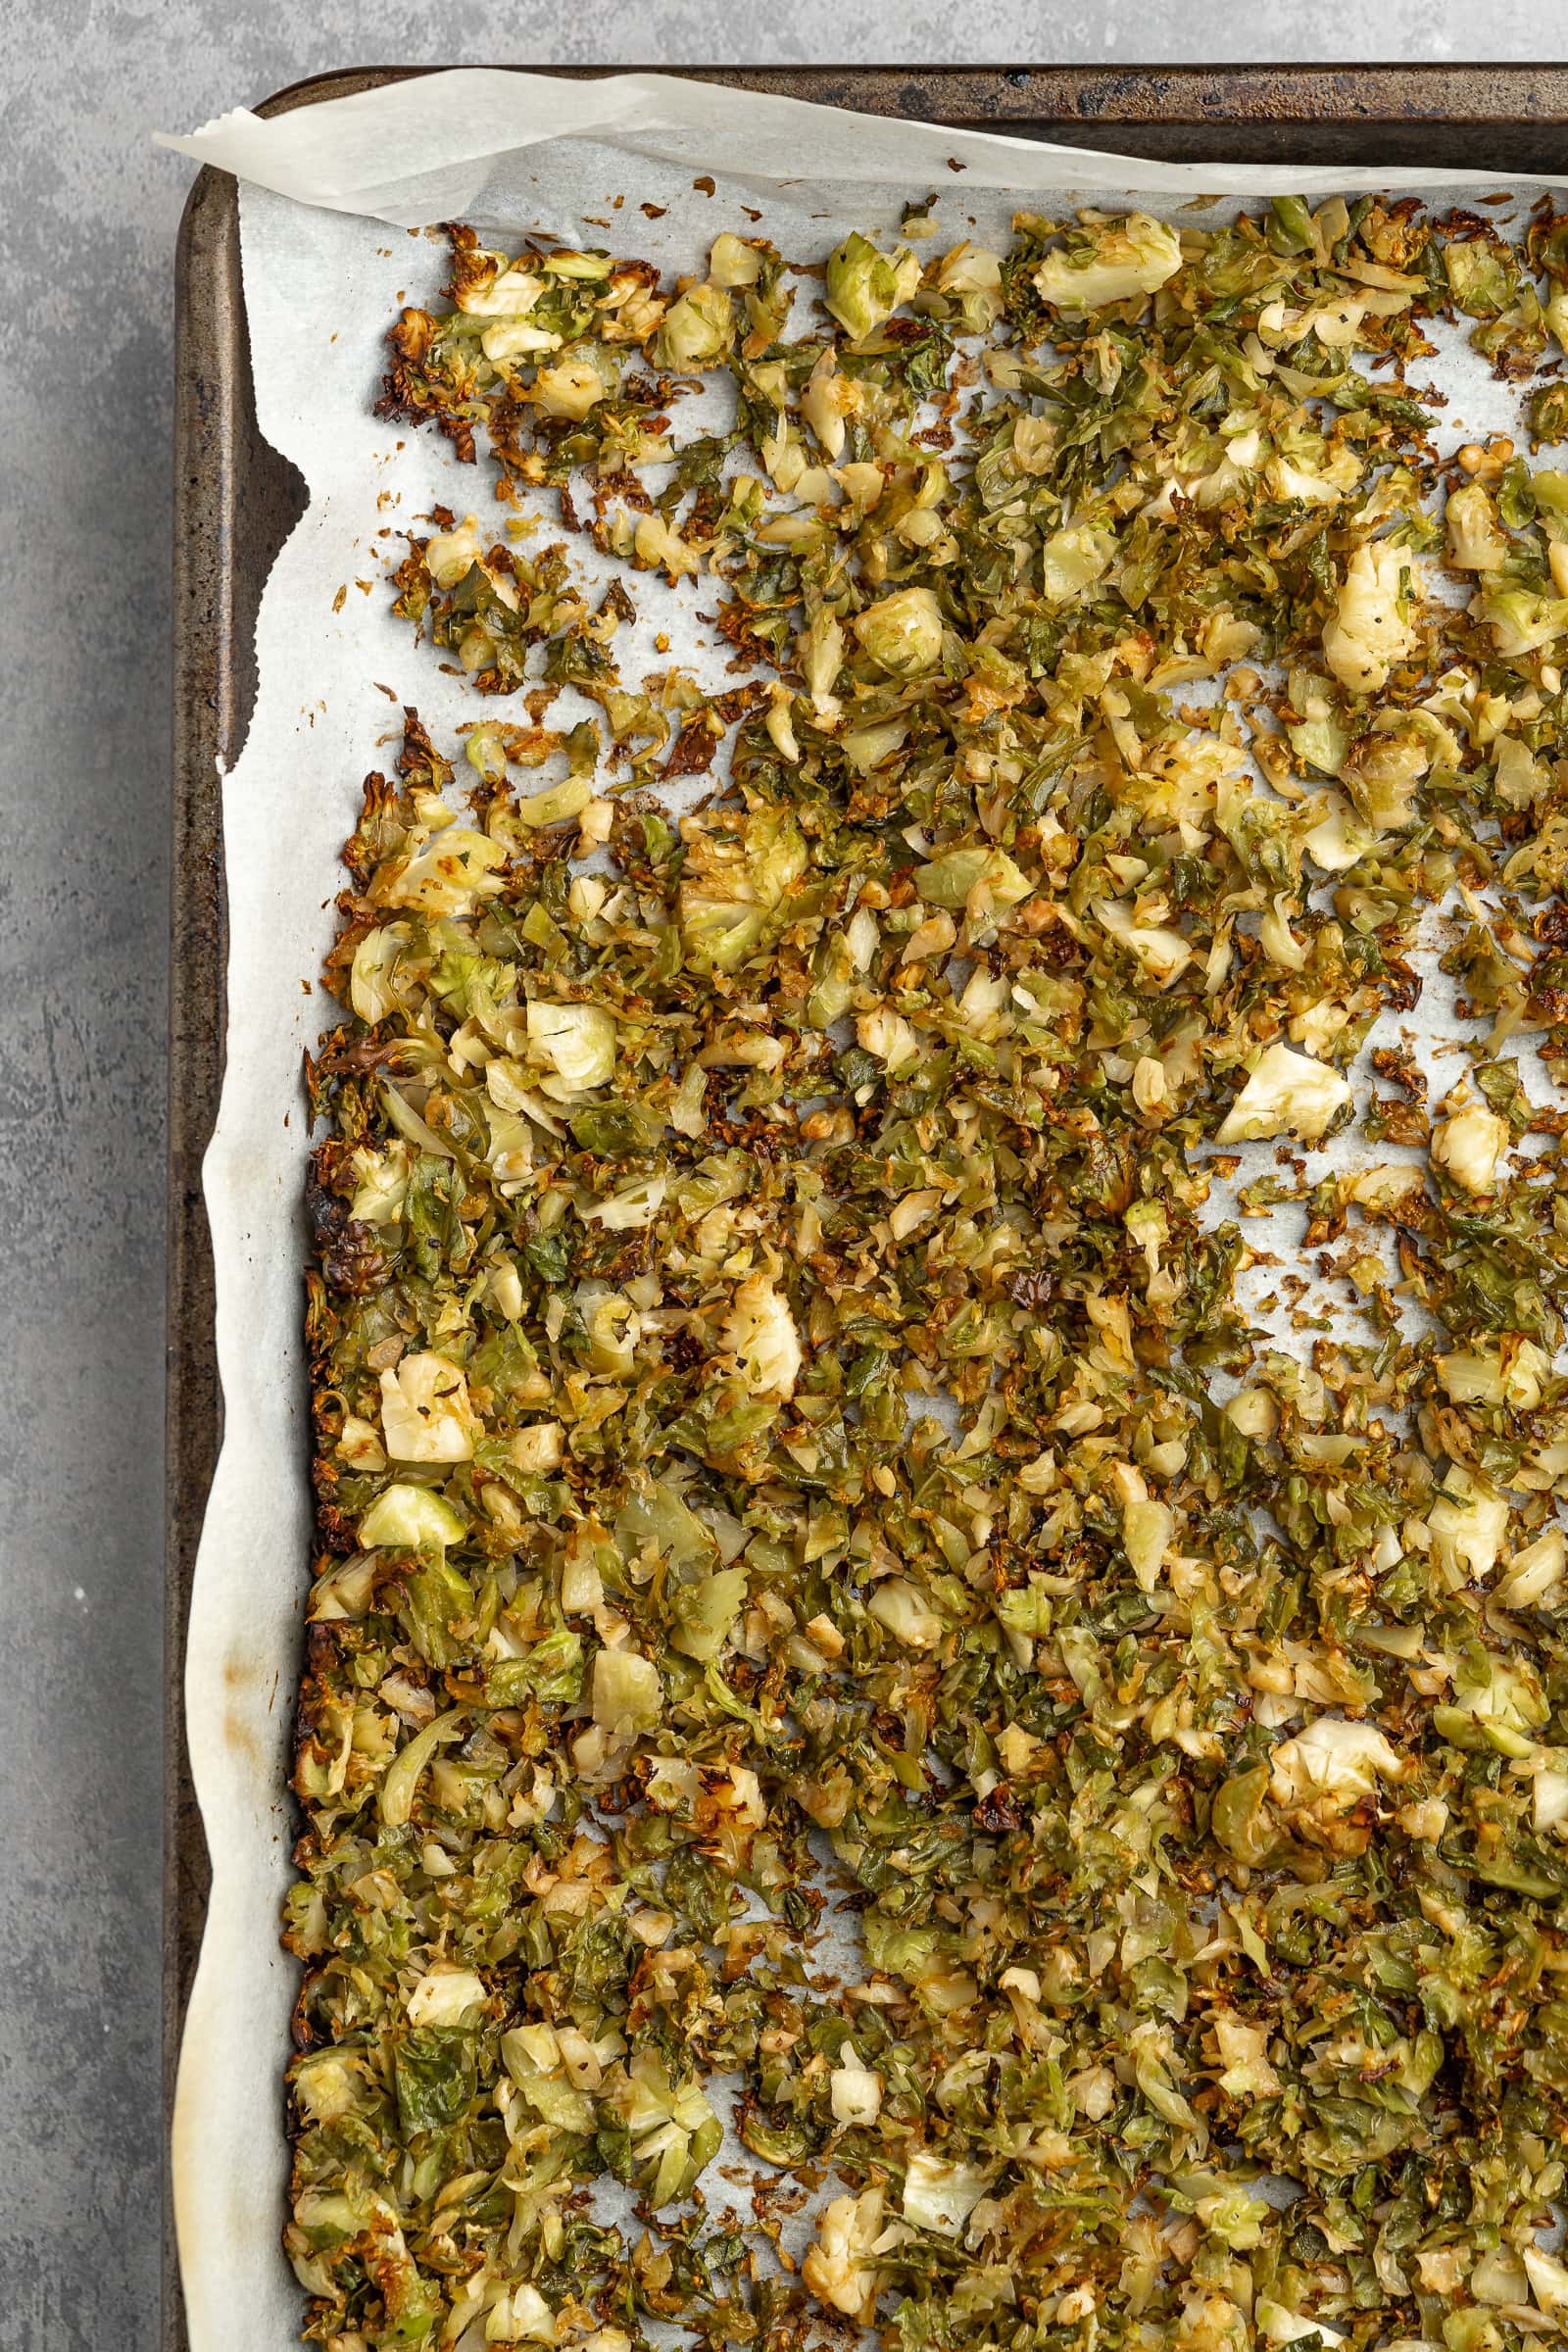 Crispy golden brown shredded Brussels sprouts on a baking tray.